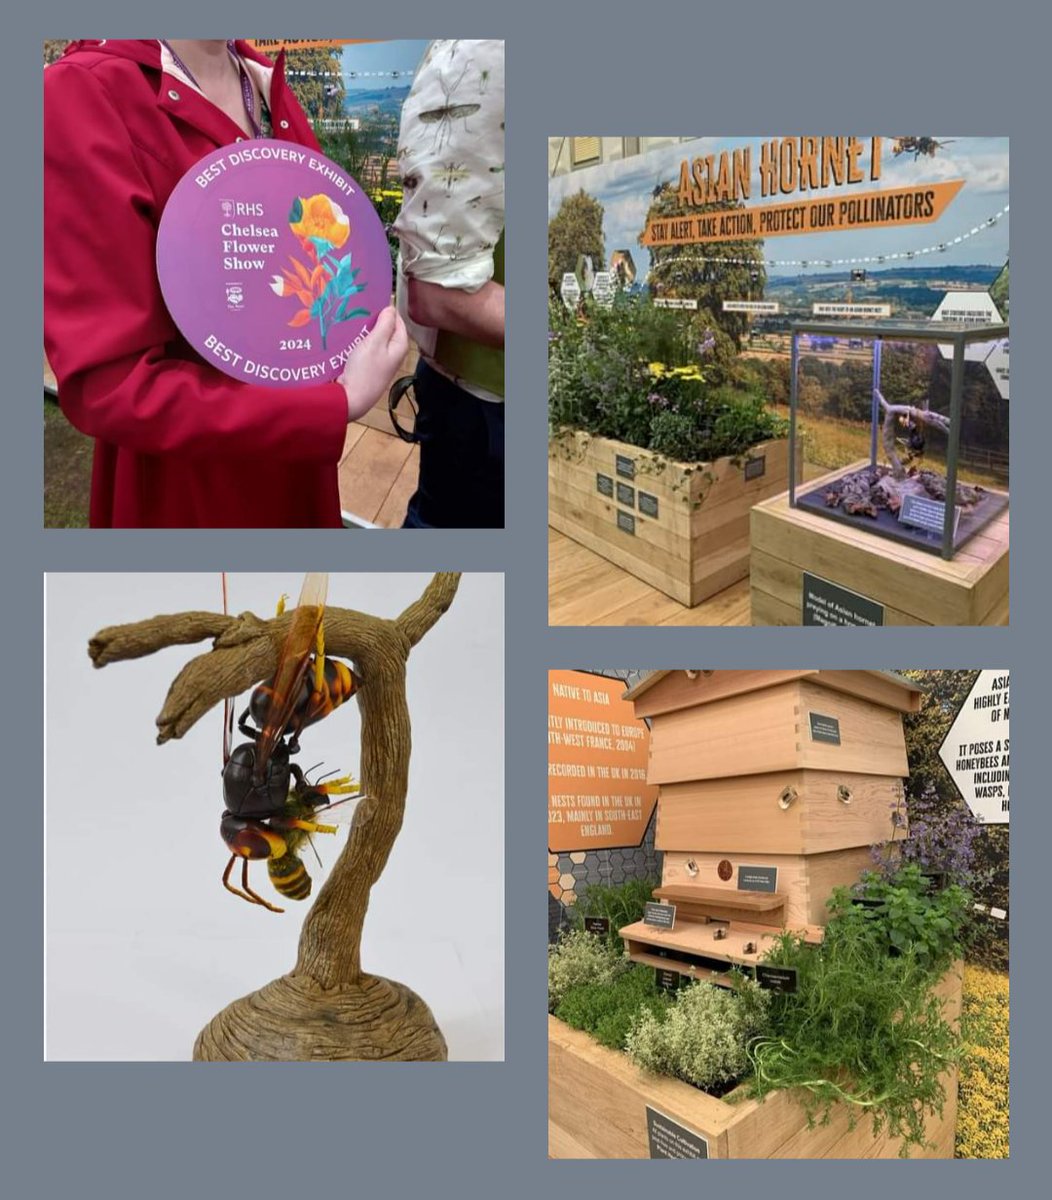 Animal Plant Heath Agency stand at Chelsea Flower Show gets best discovery exhibit in show as well as a gold medal.